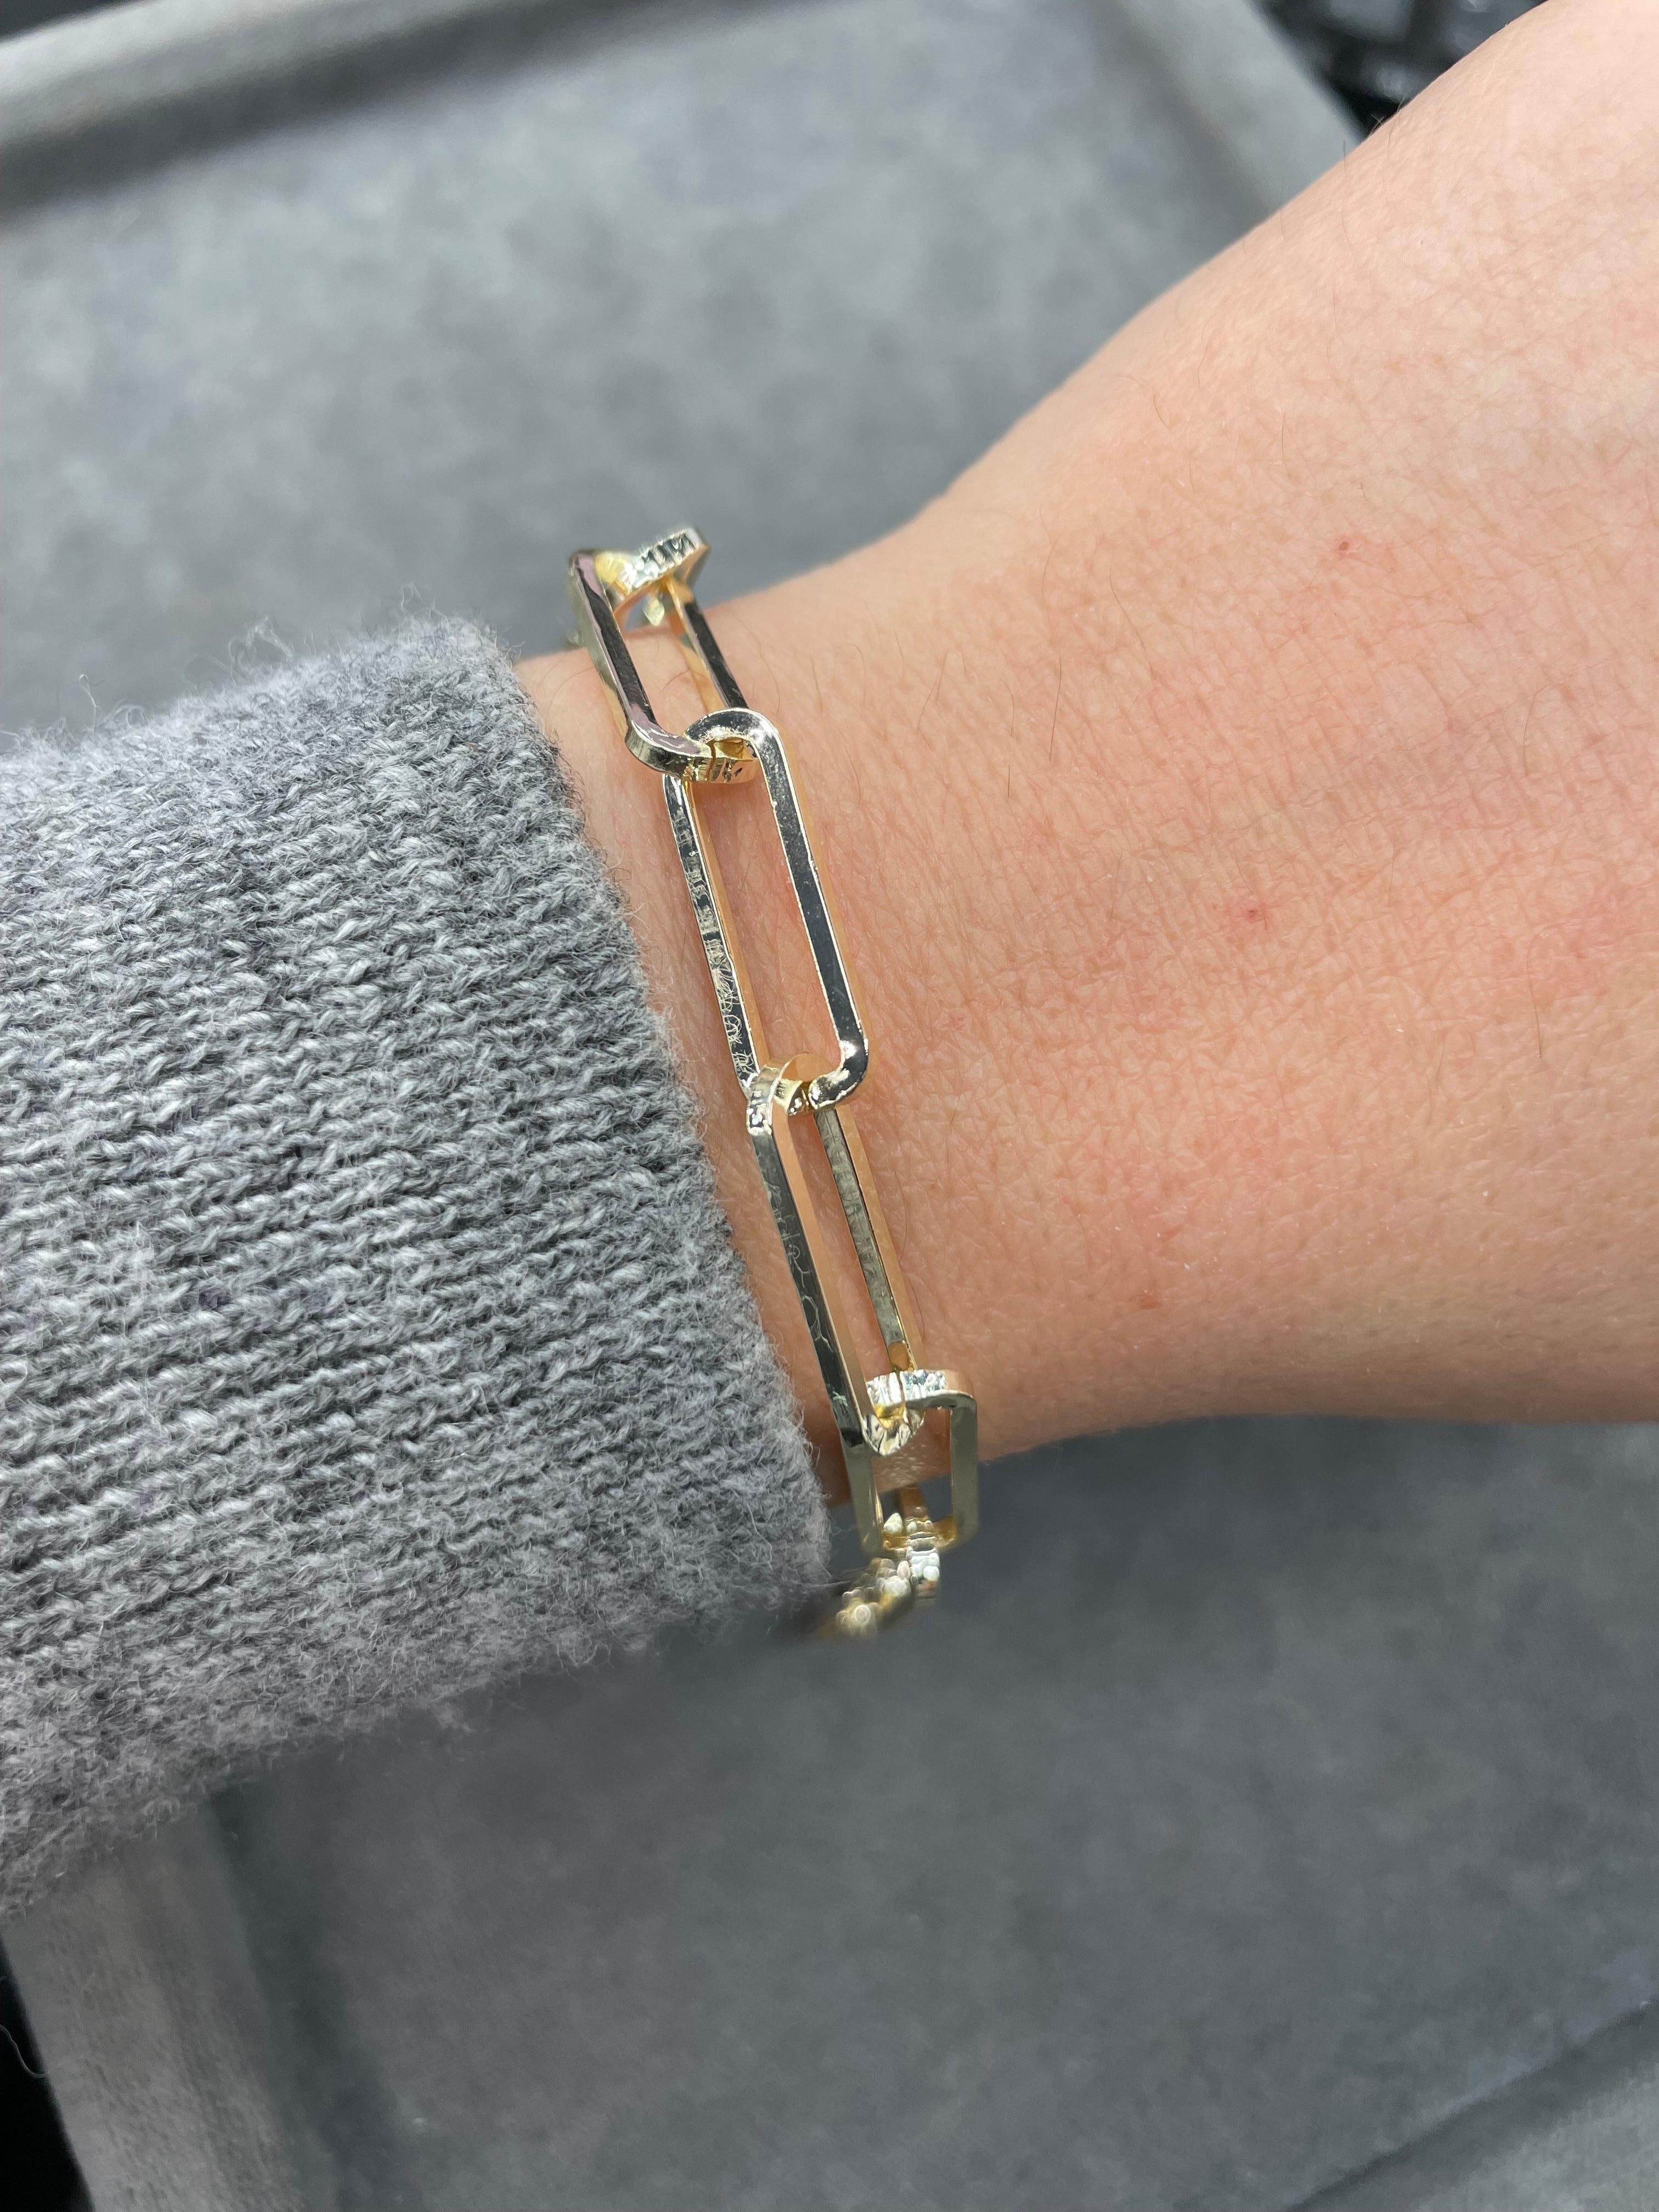 Gold plated brass bracelet featuring 9 paperclips on a chain clasp.
Will not tarnish! 
Bracelet is 7 inches with 1 inch of chain. 